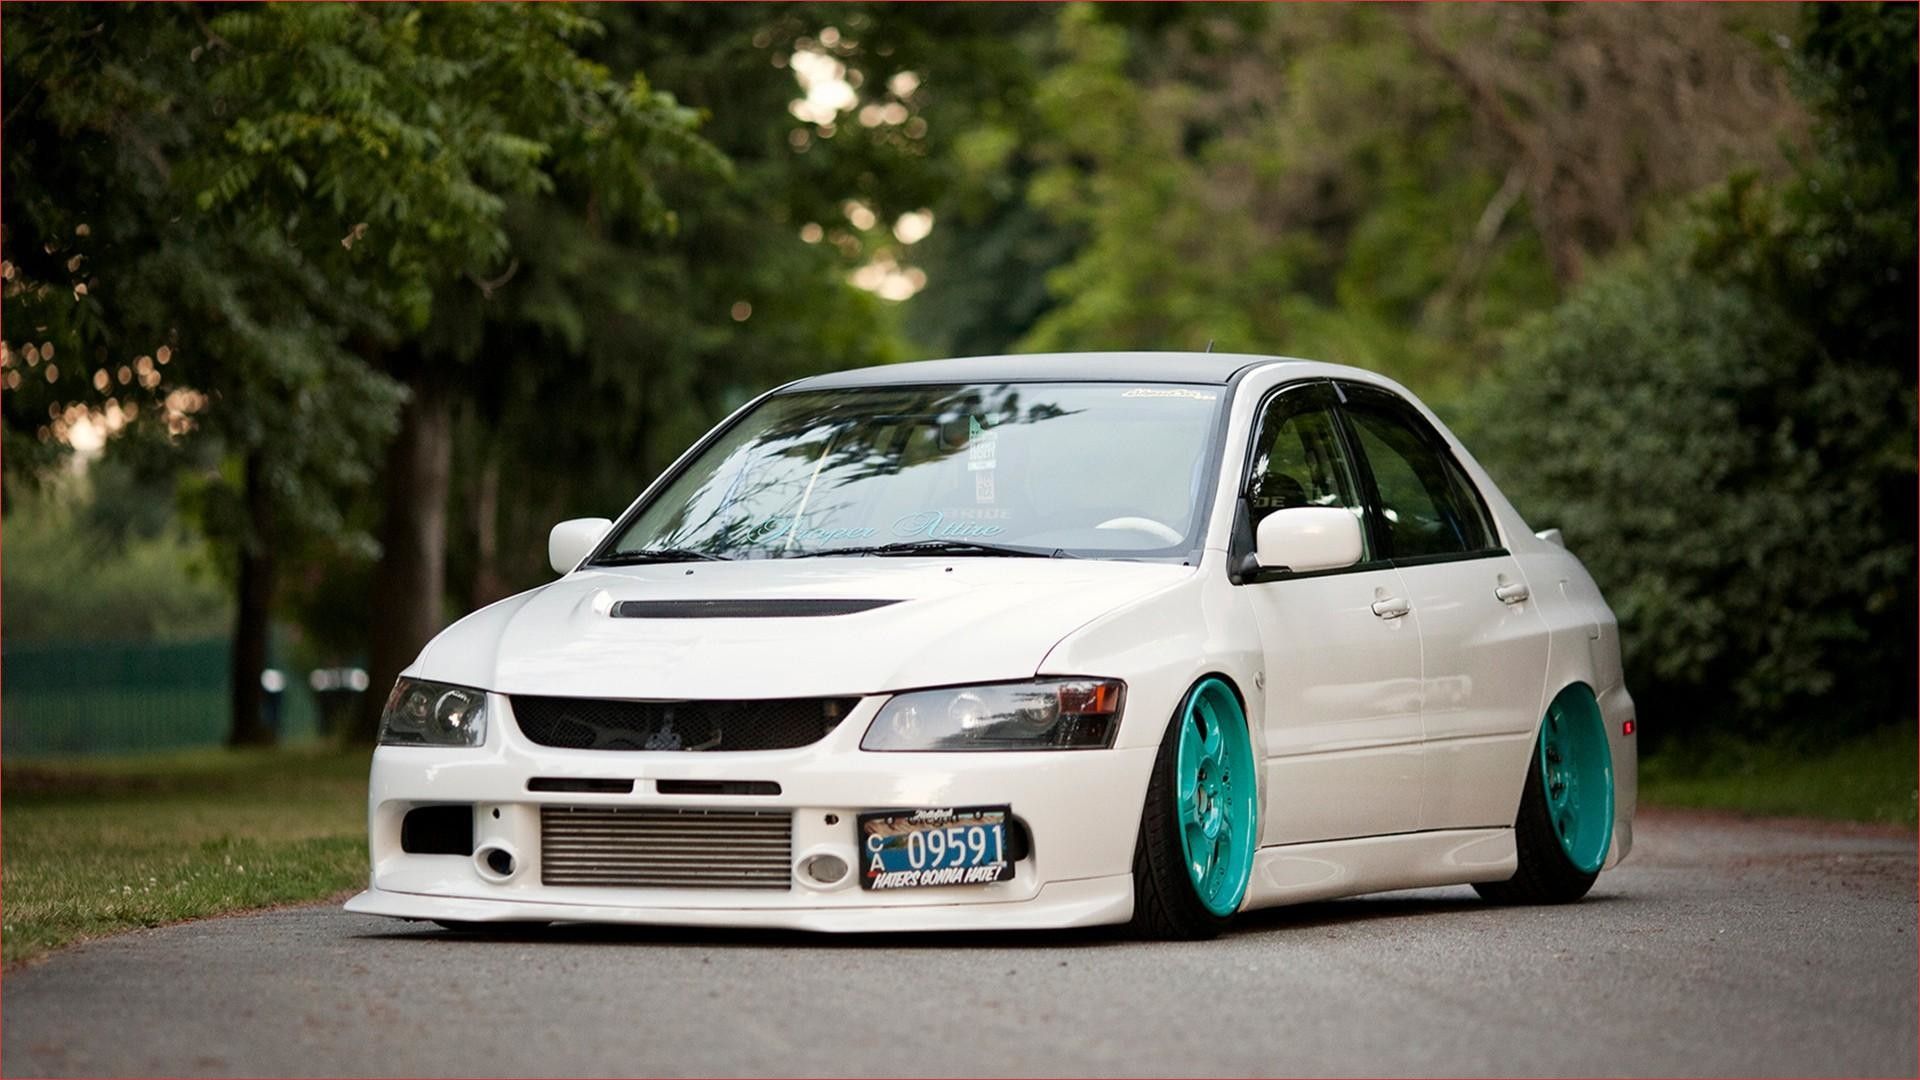 Stance Car posted by Ryan Johnson stance cars HD wallpaper  Pxfuel